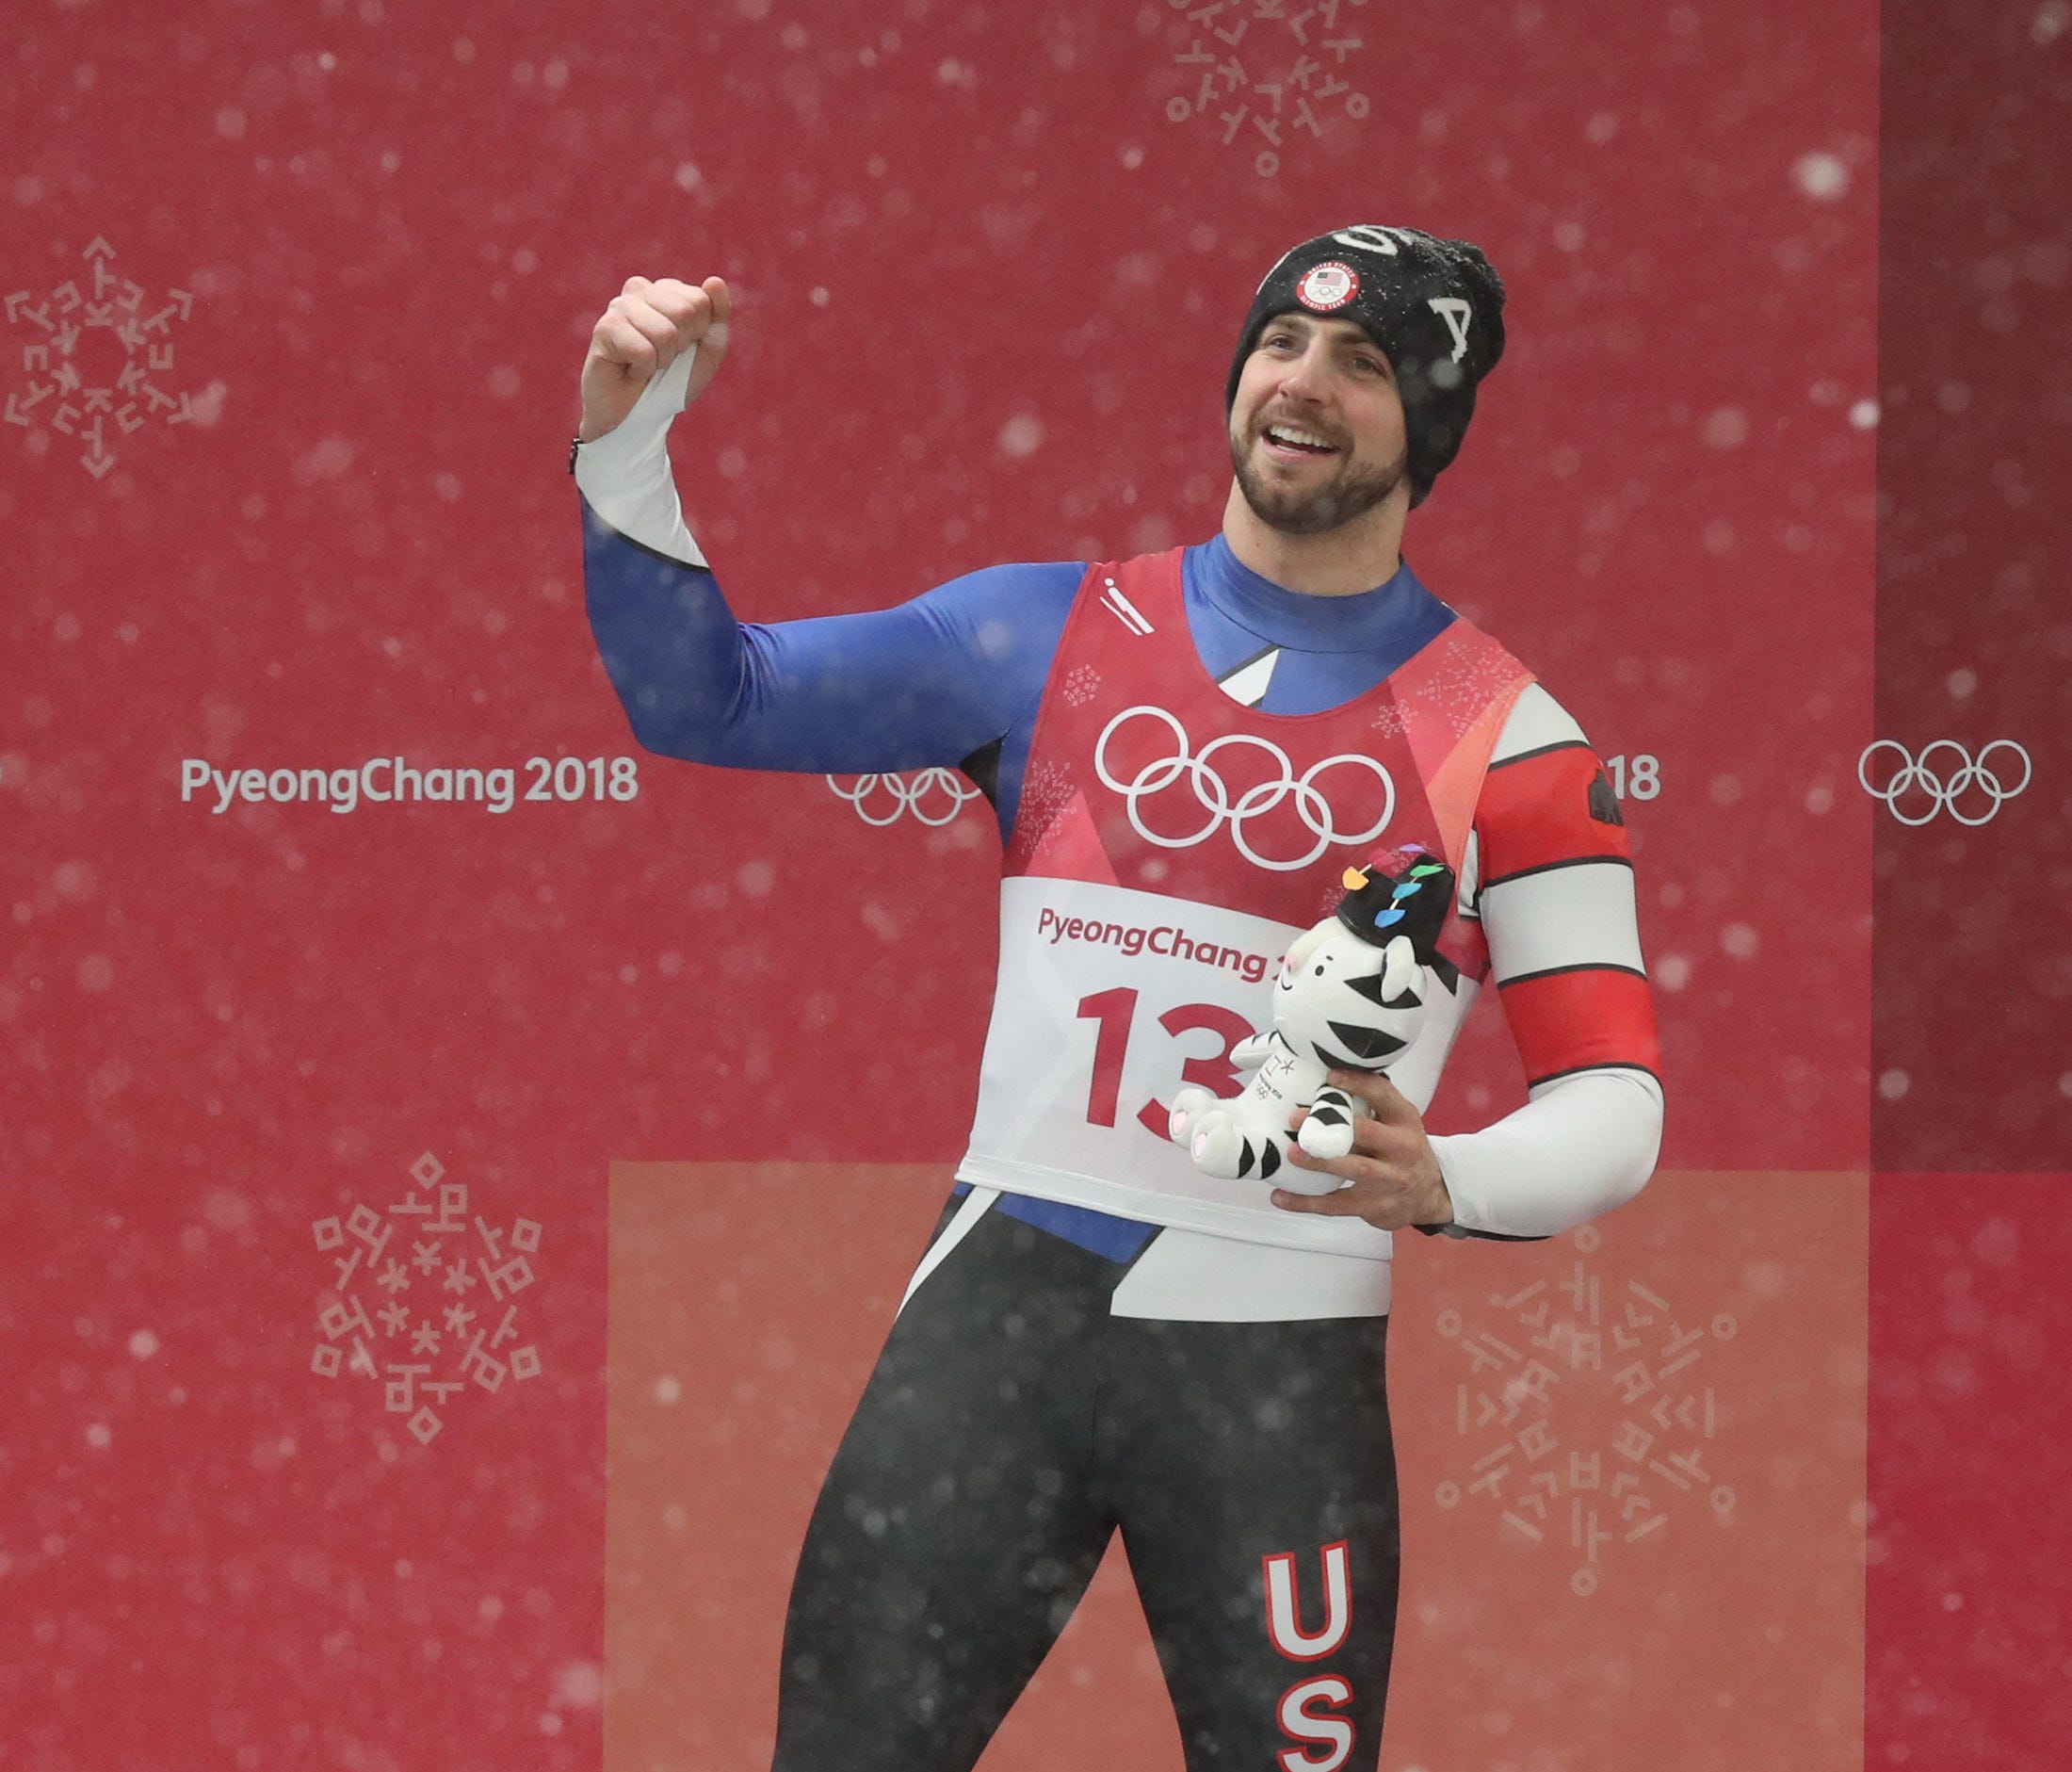 Luge singles silver medalist Chris Mazdzer of the USA.